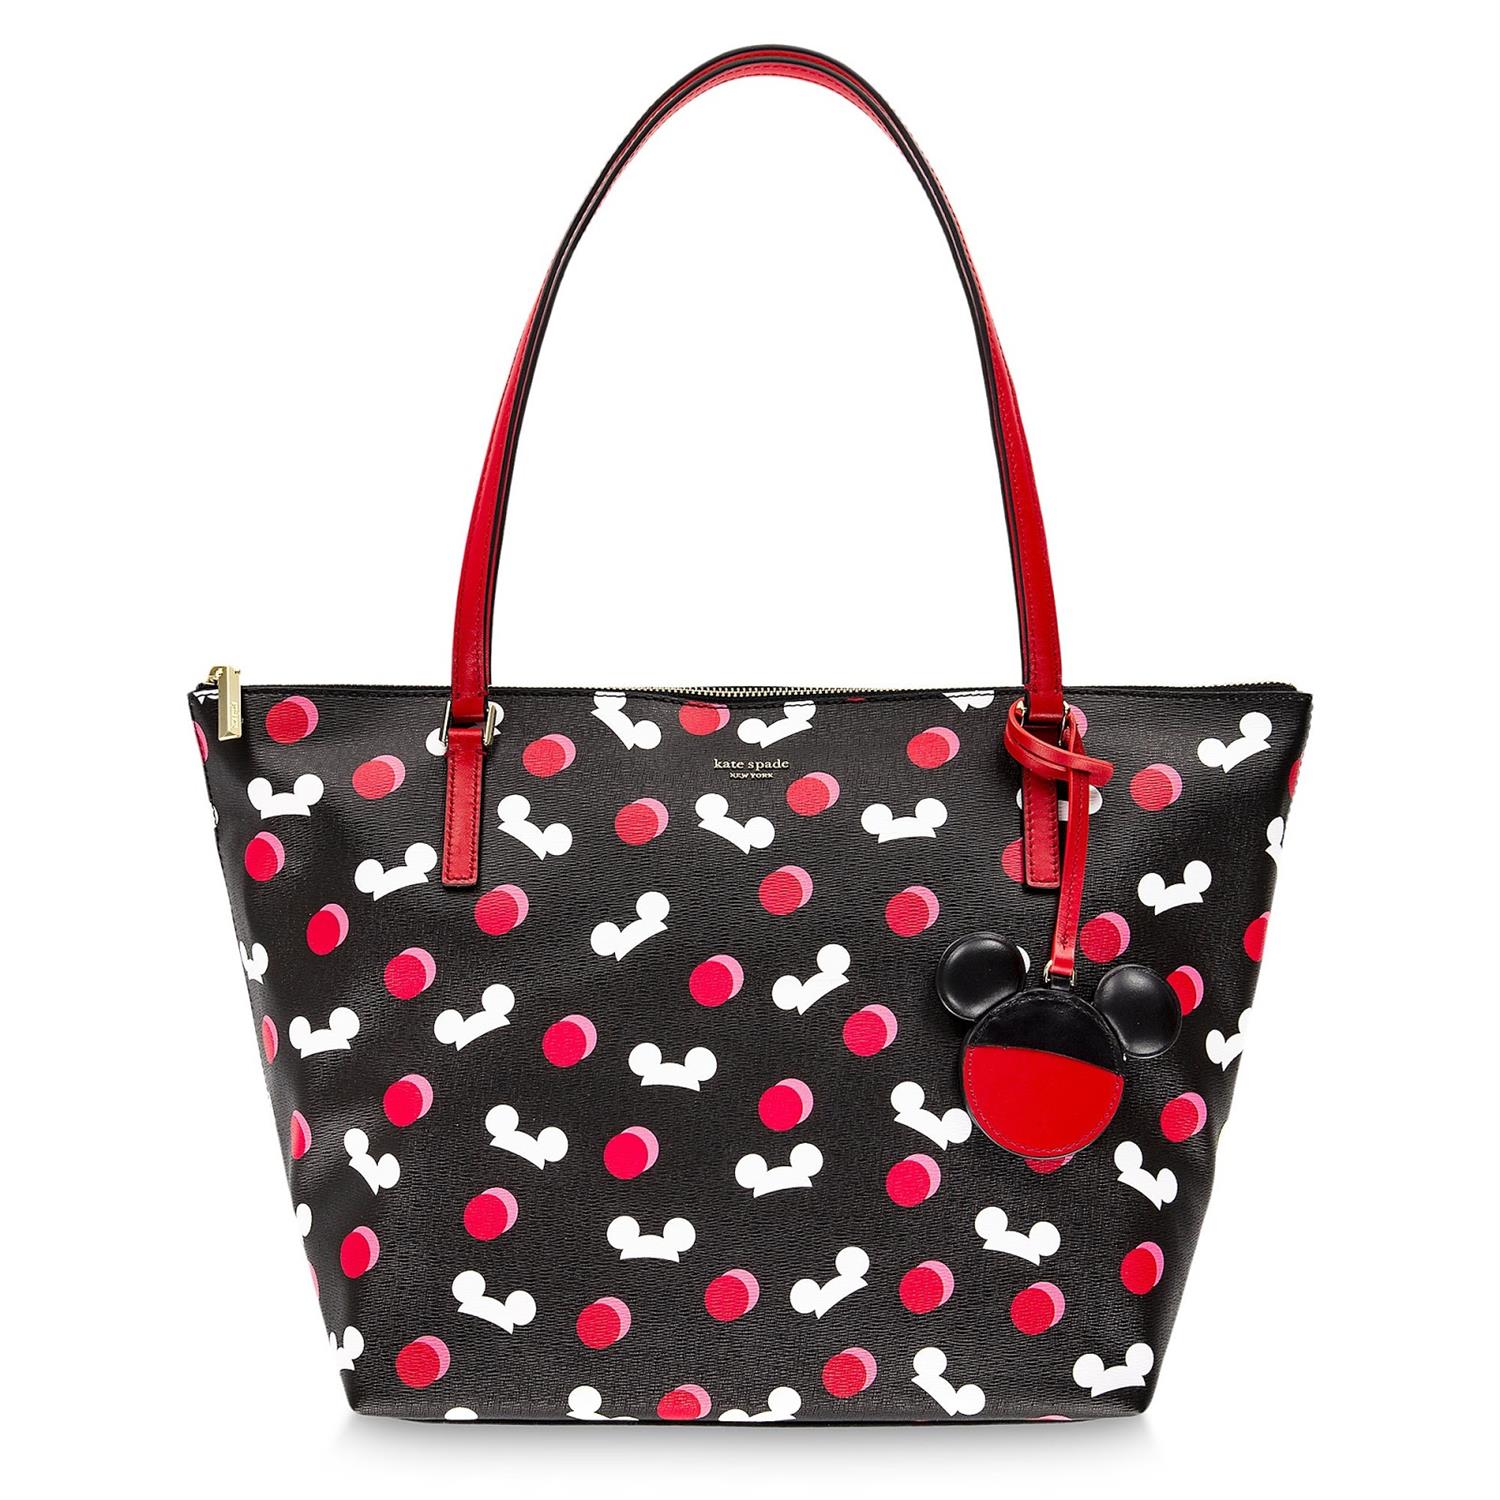 Surprise Mom with Kate Spade, Vera Bradley Bags and Totes from shopDisney